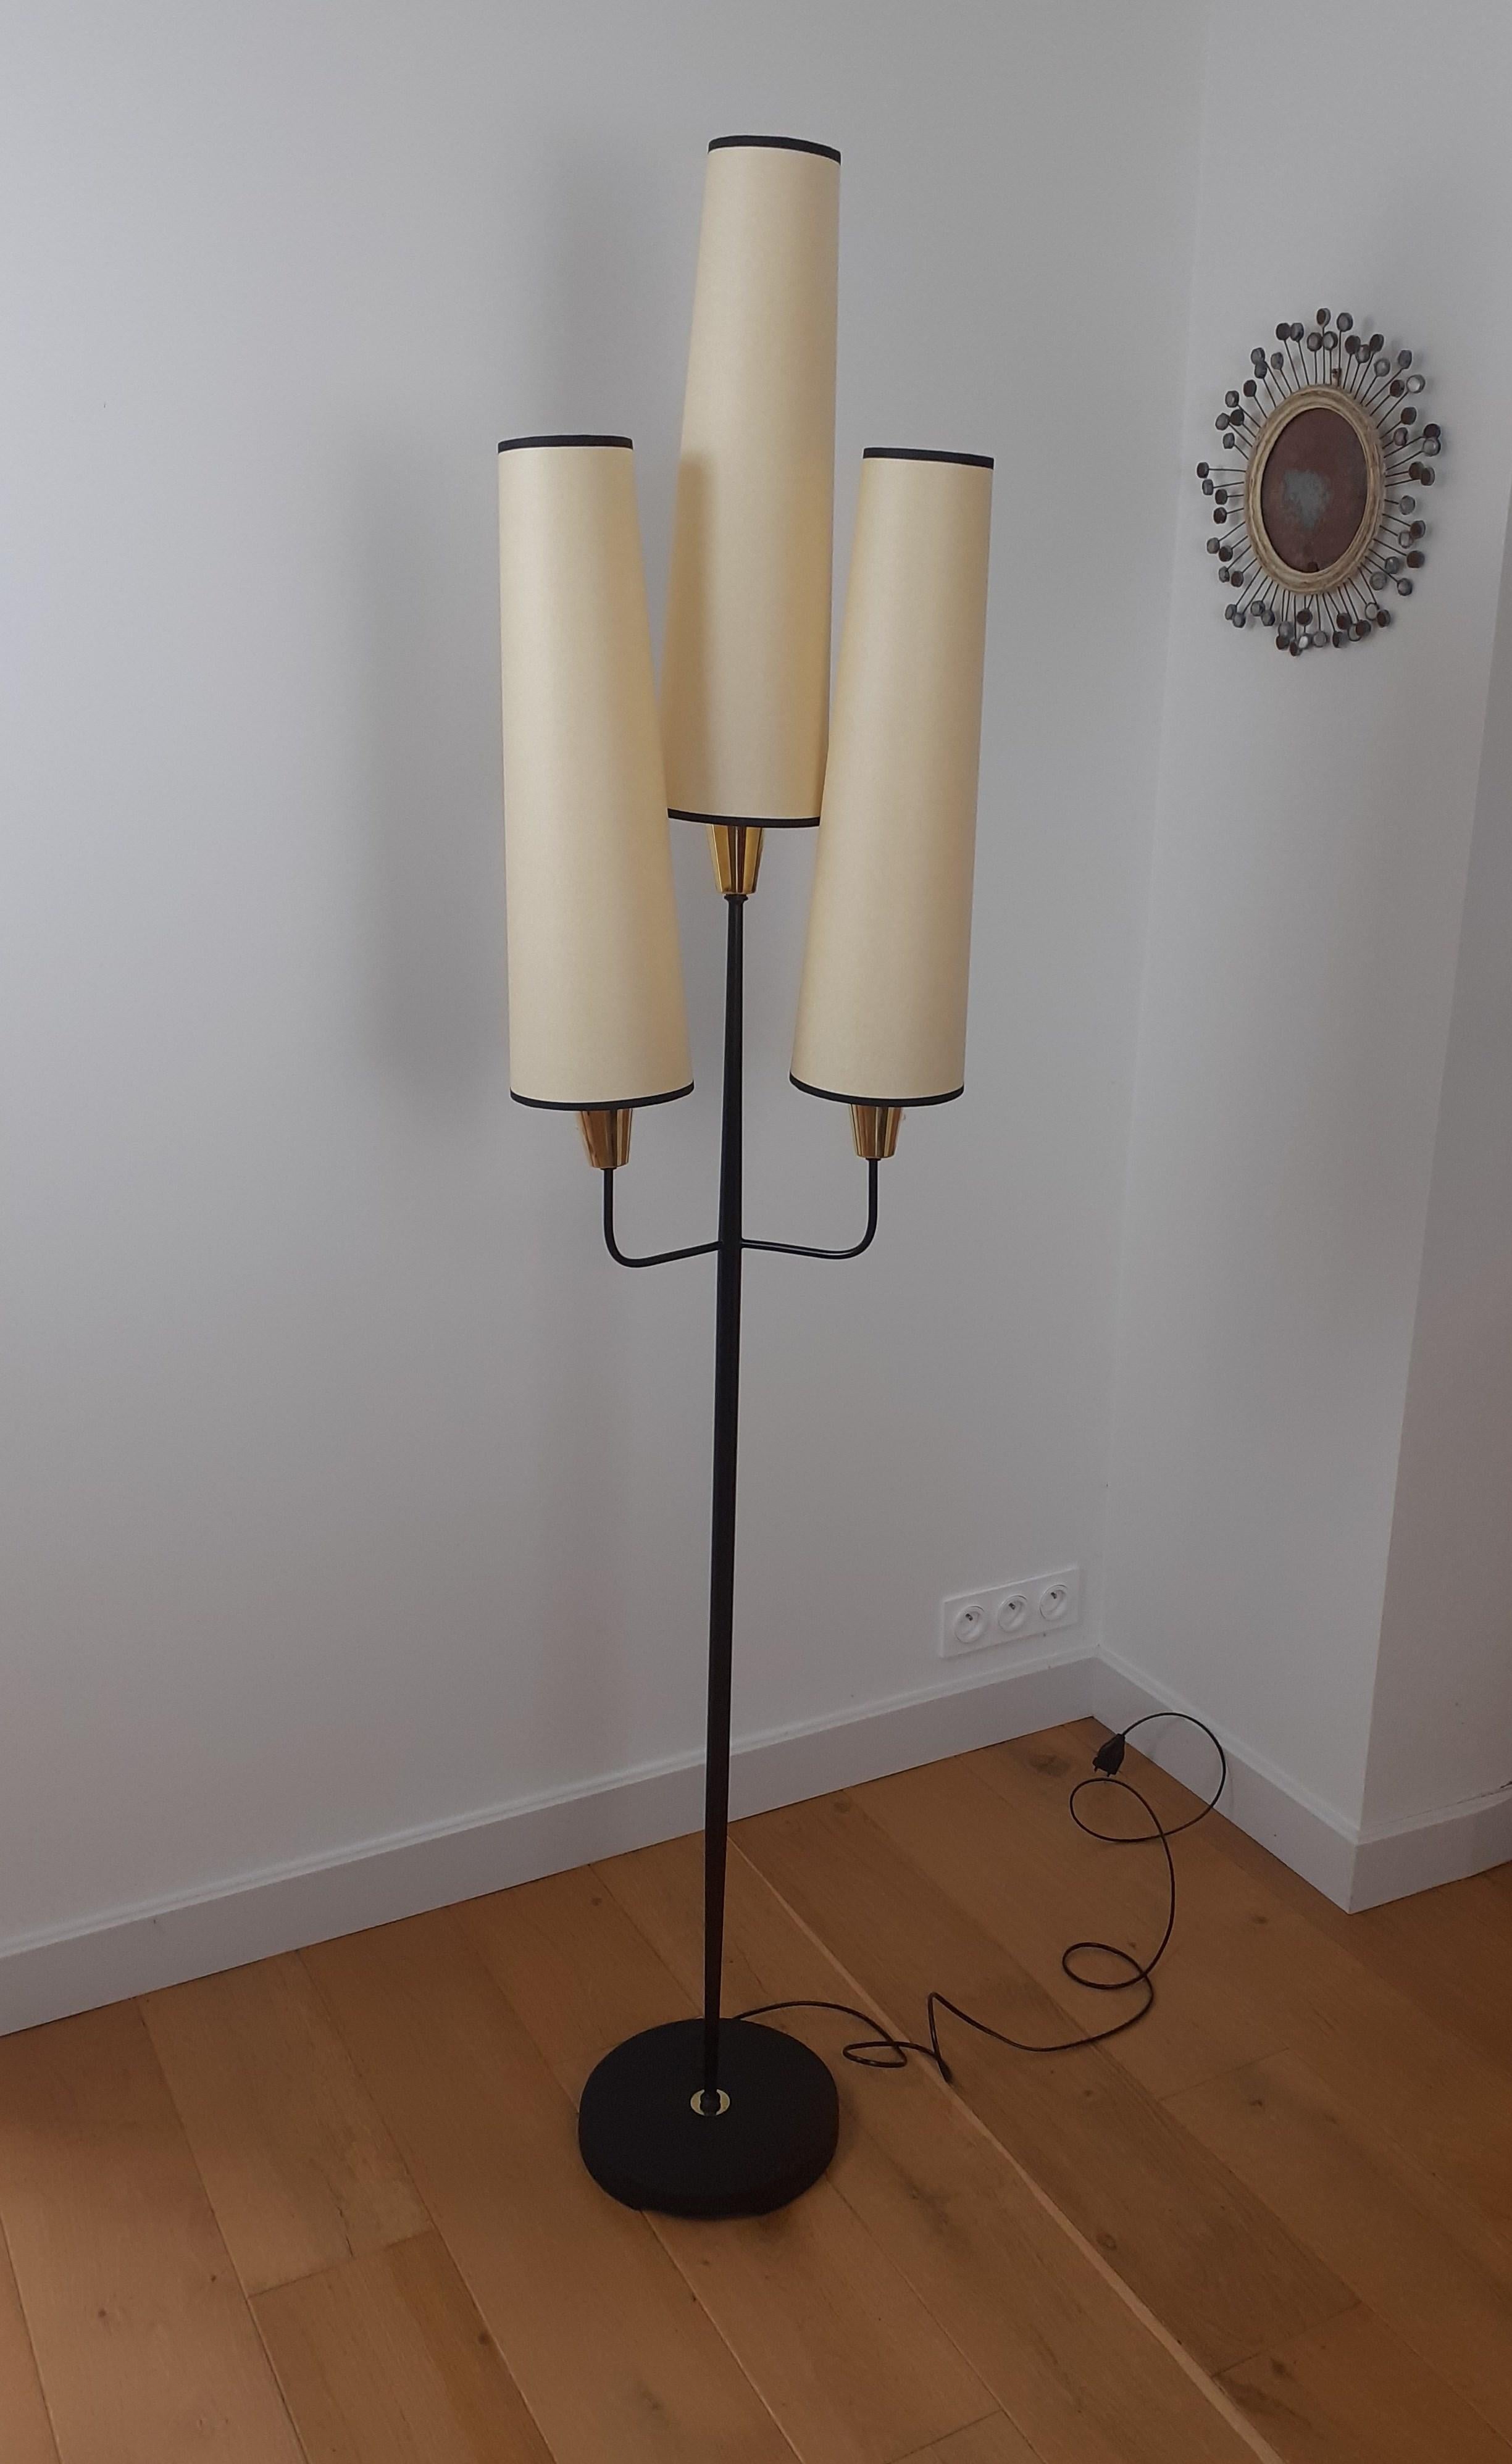 Floor lamp in black lacquered metal,
composed of a circular cast iron base, mounted on a conical metal arm, ending with 3 light arms arranged in a trident.
French work from Maison Lunel circa 1950.
This floor lamp has been completely restored,